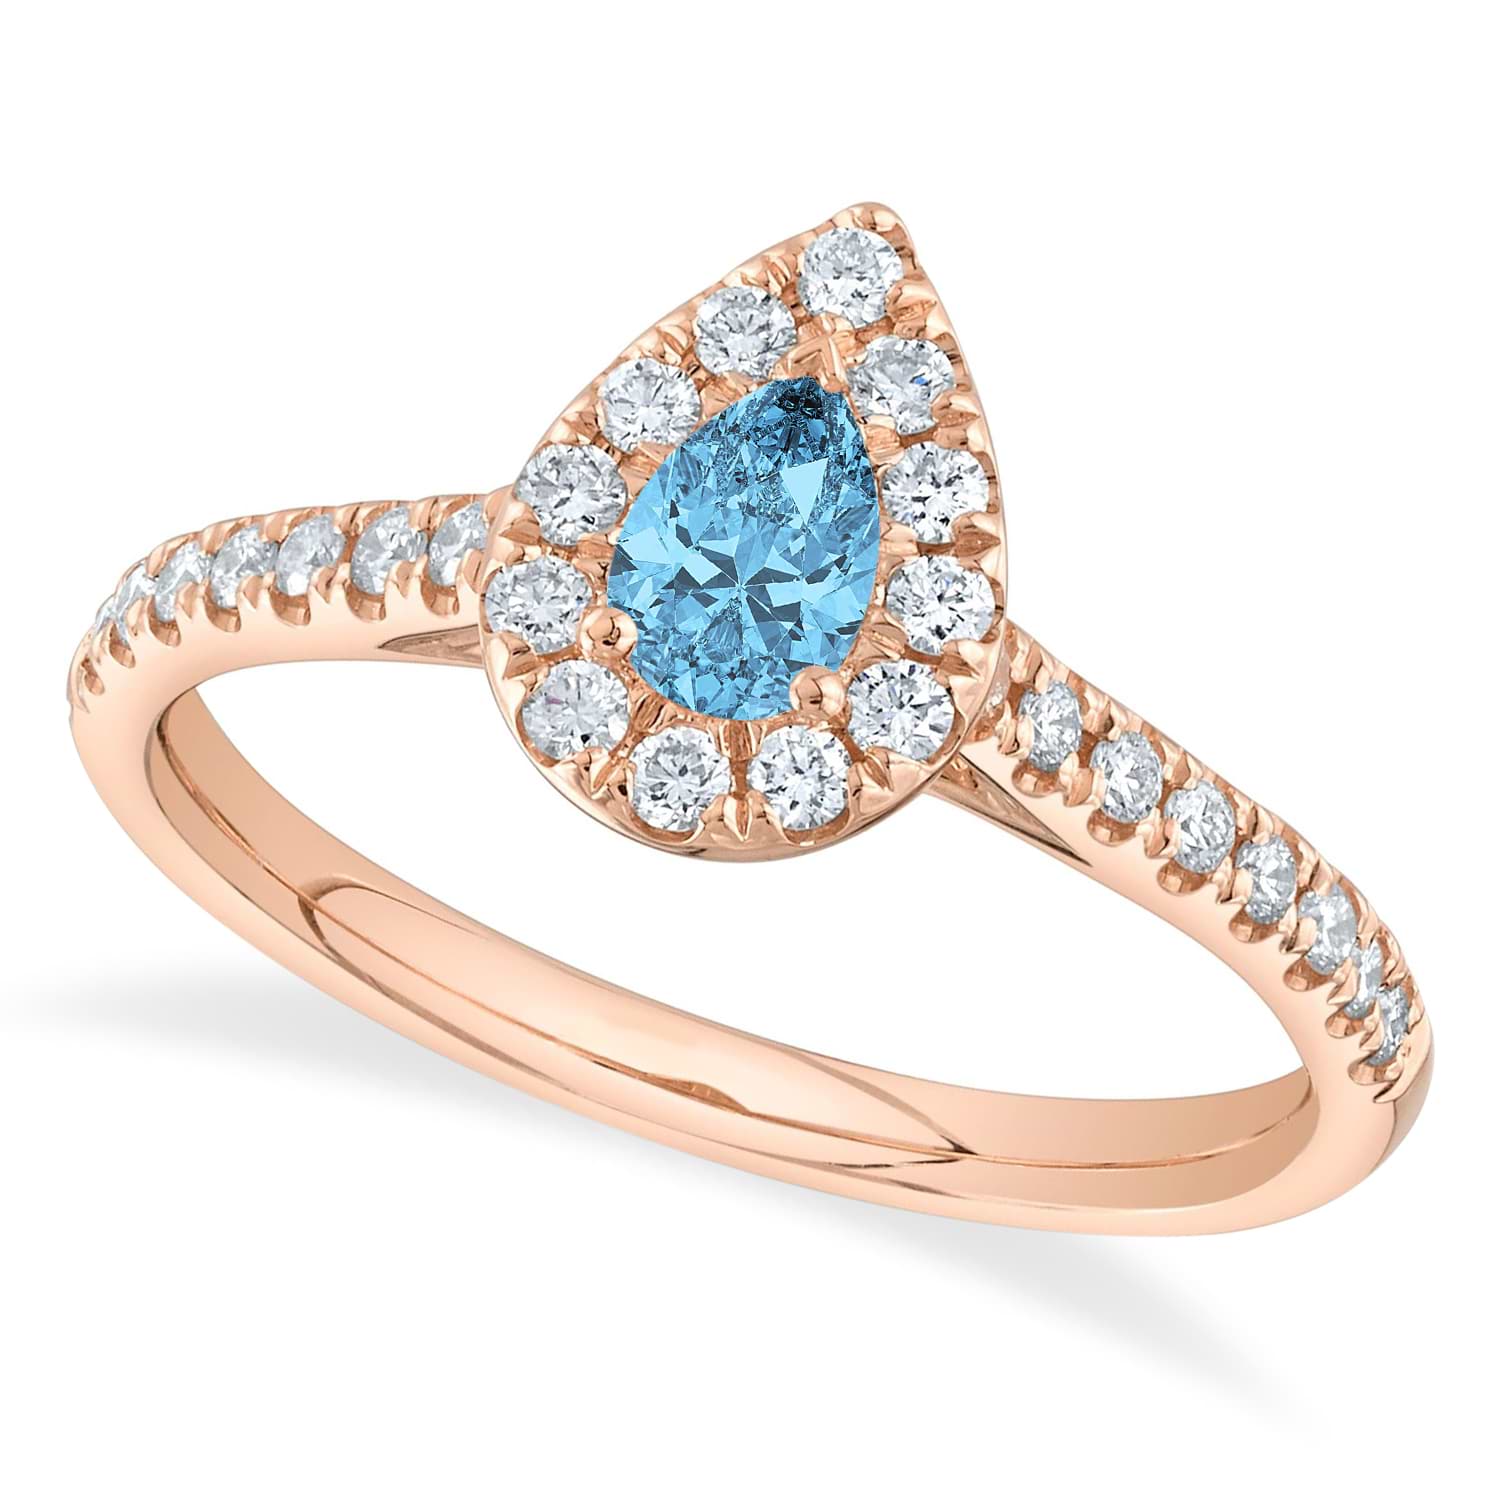 Pear-Cut Blue Topaz Engagement Ring 14K Rose Gold (0.58ct)